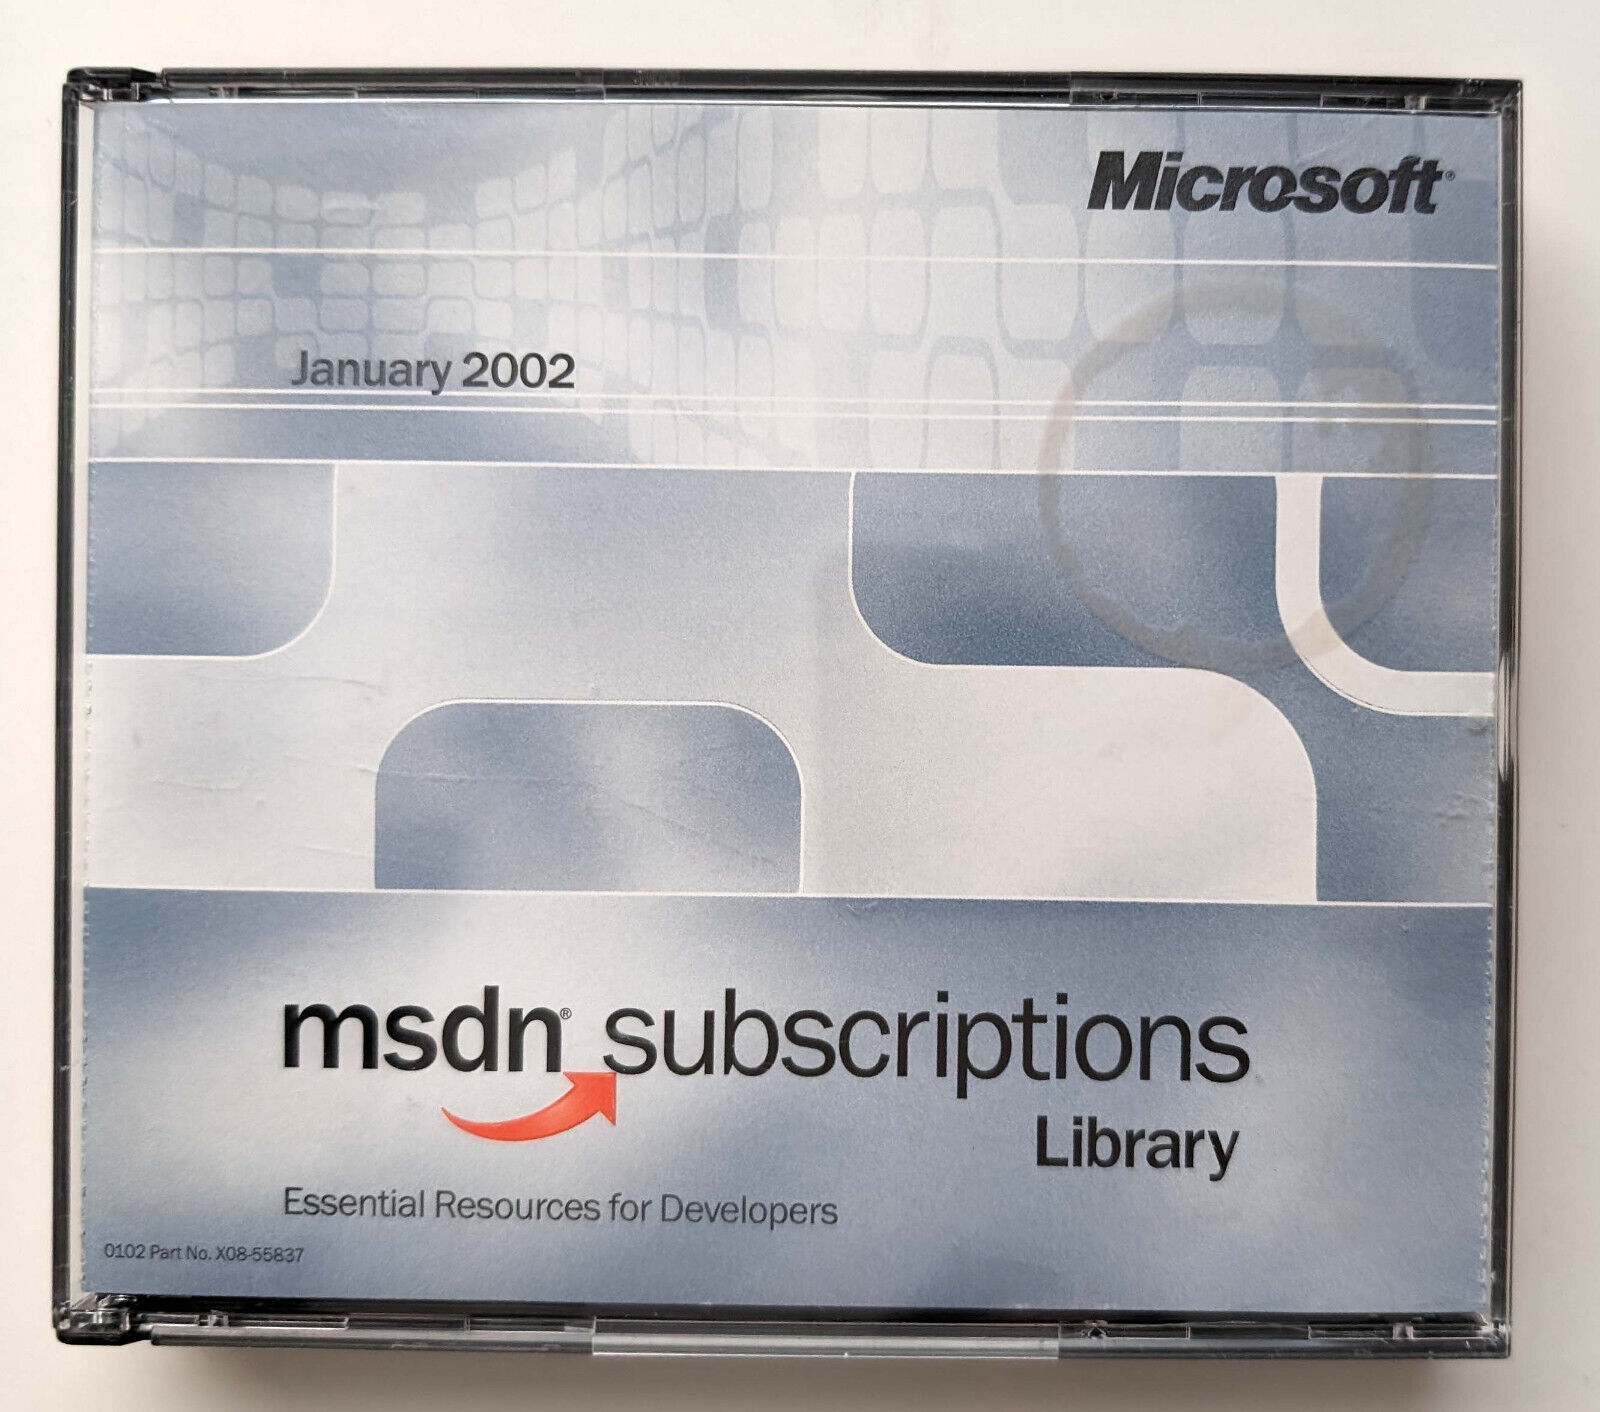 Original RARE VINTAGE Microsoft MSDN Subscriptions Library January 2002 w/CASE